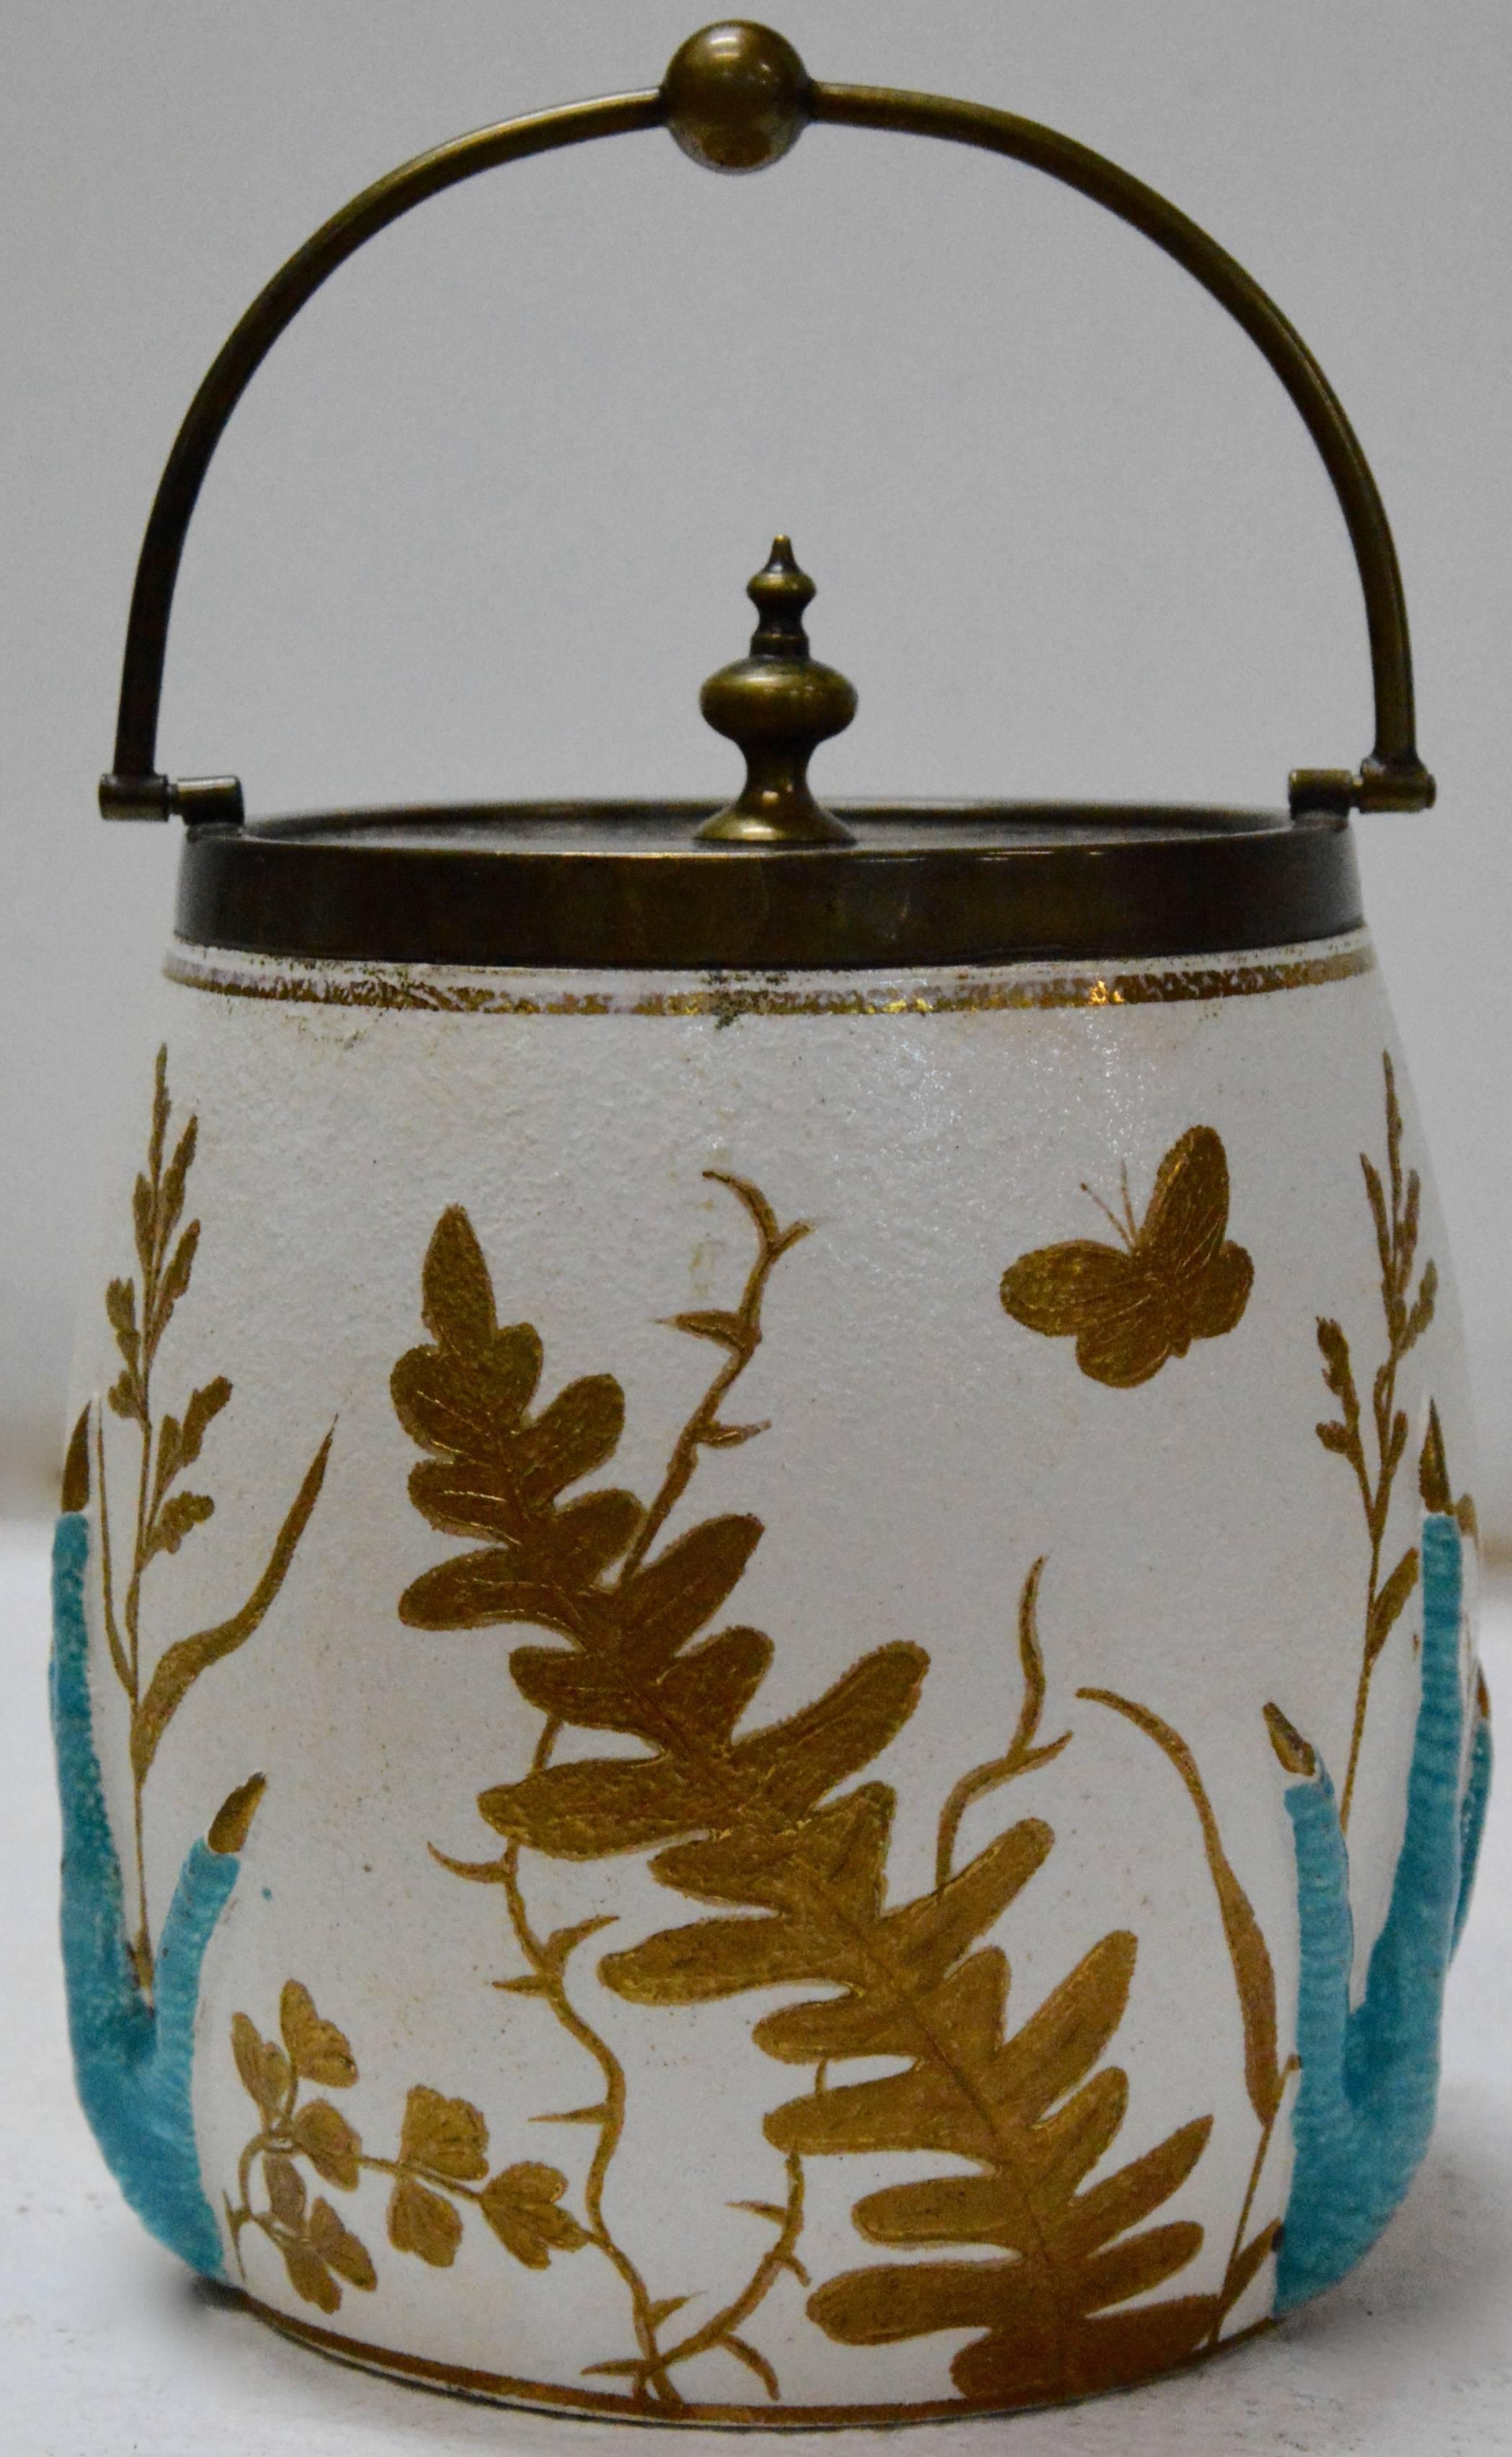 We are offering you a unique biscuit jar featuring raised turquoise crow claws amongst gold leaves on white porcelain. The top and handle are made of cast bronze with a lovely aged patina. The base is marked 3793. This is a unique piece to add to